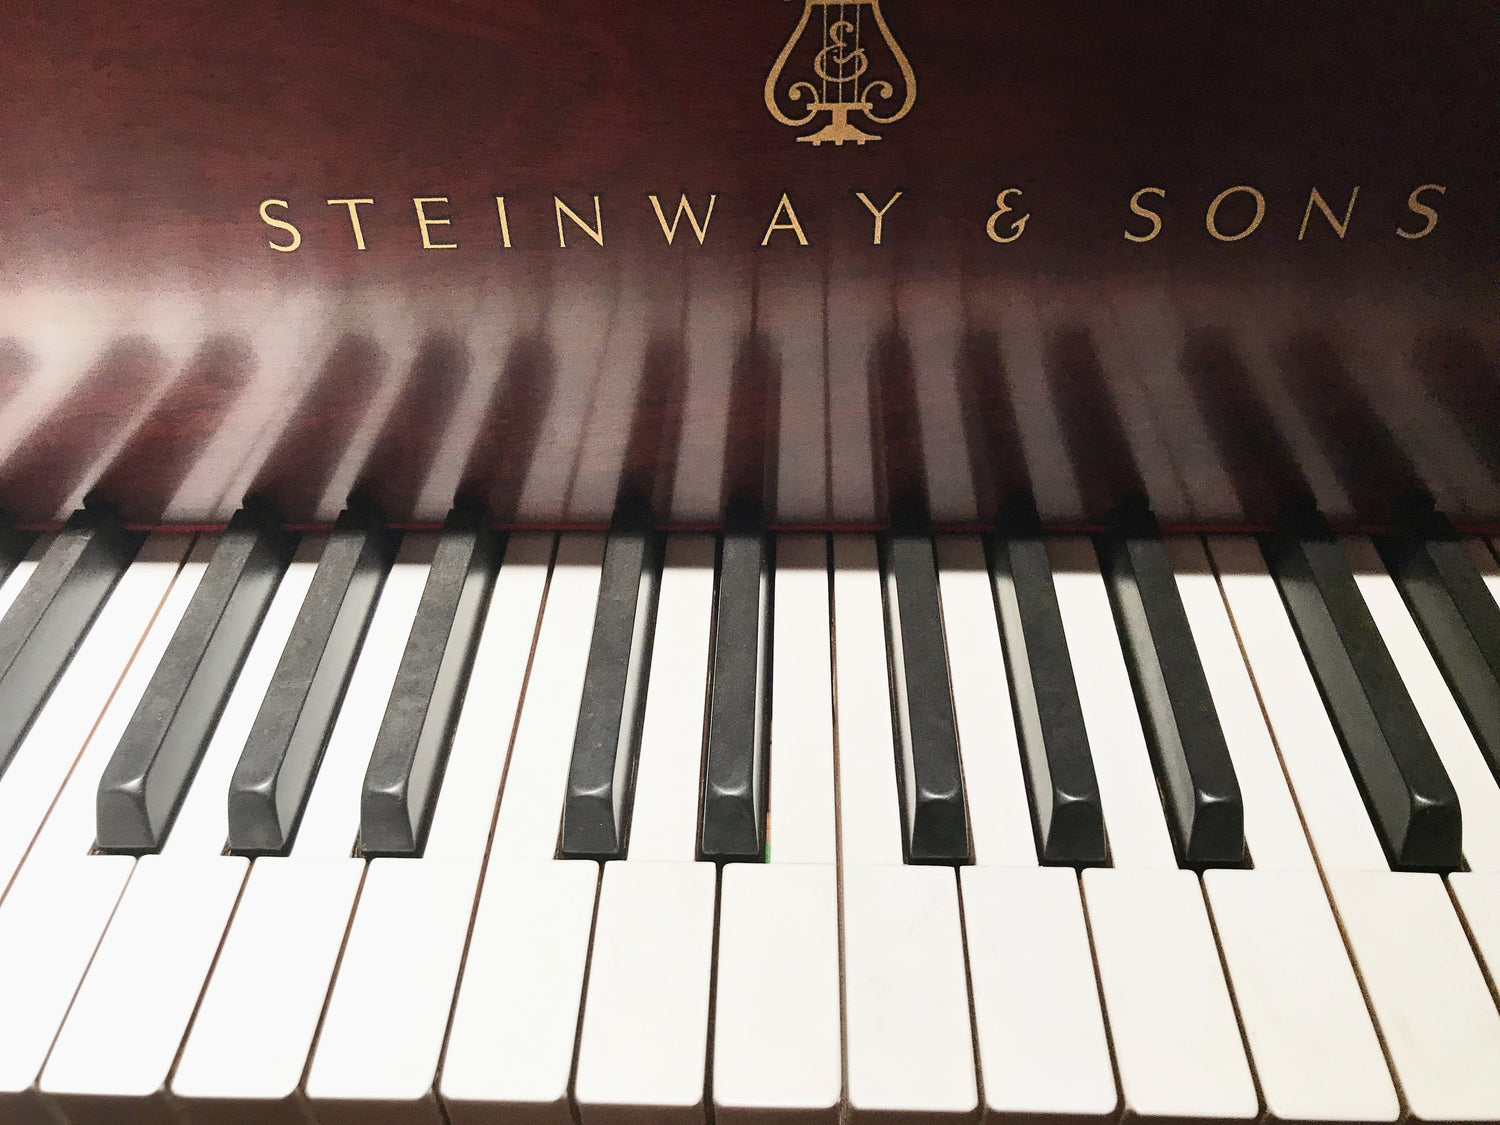 Steinway and sons logo